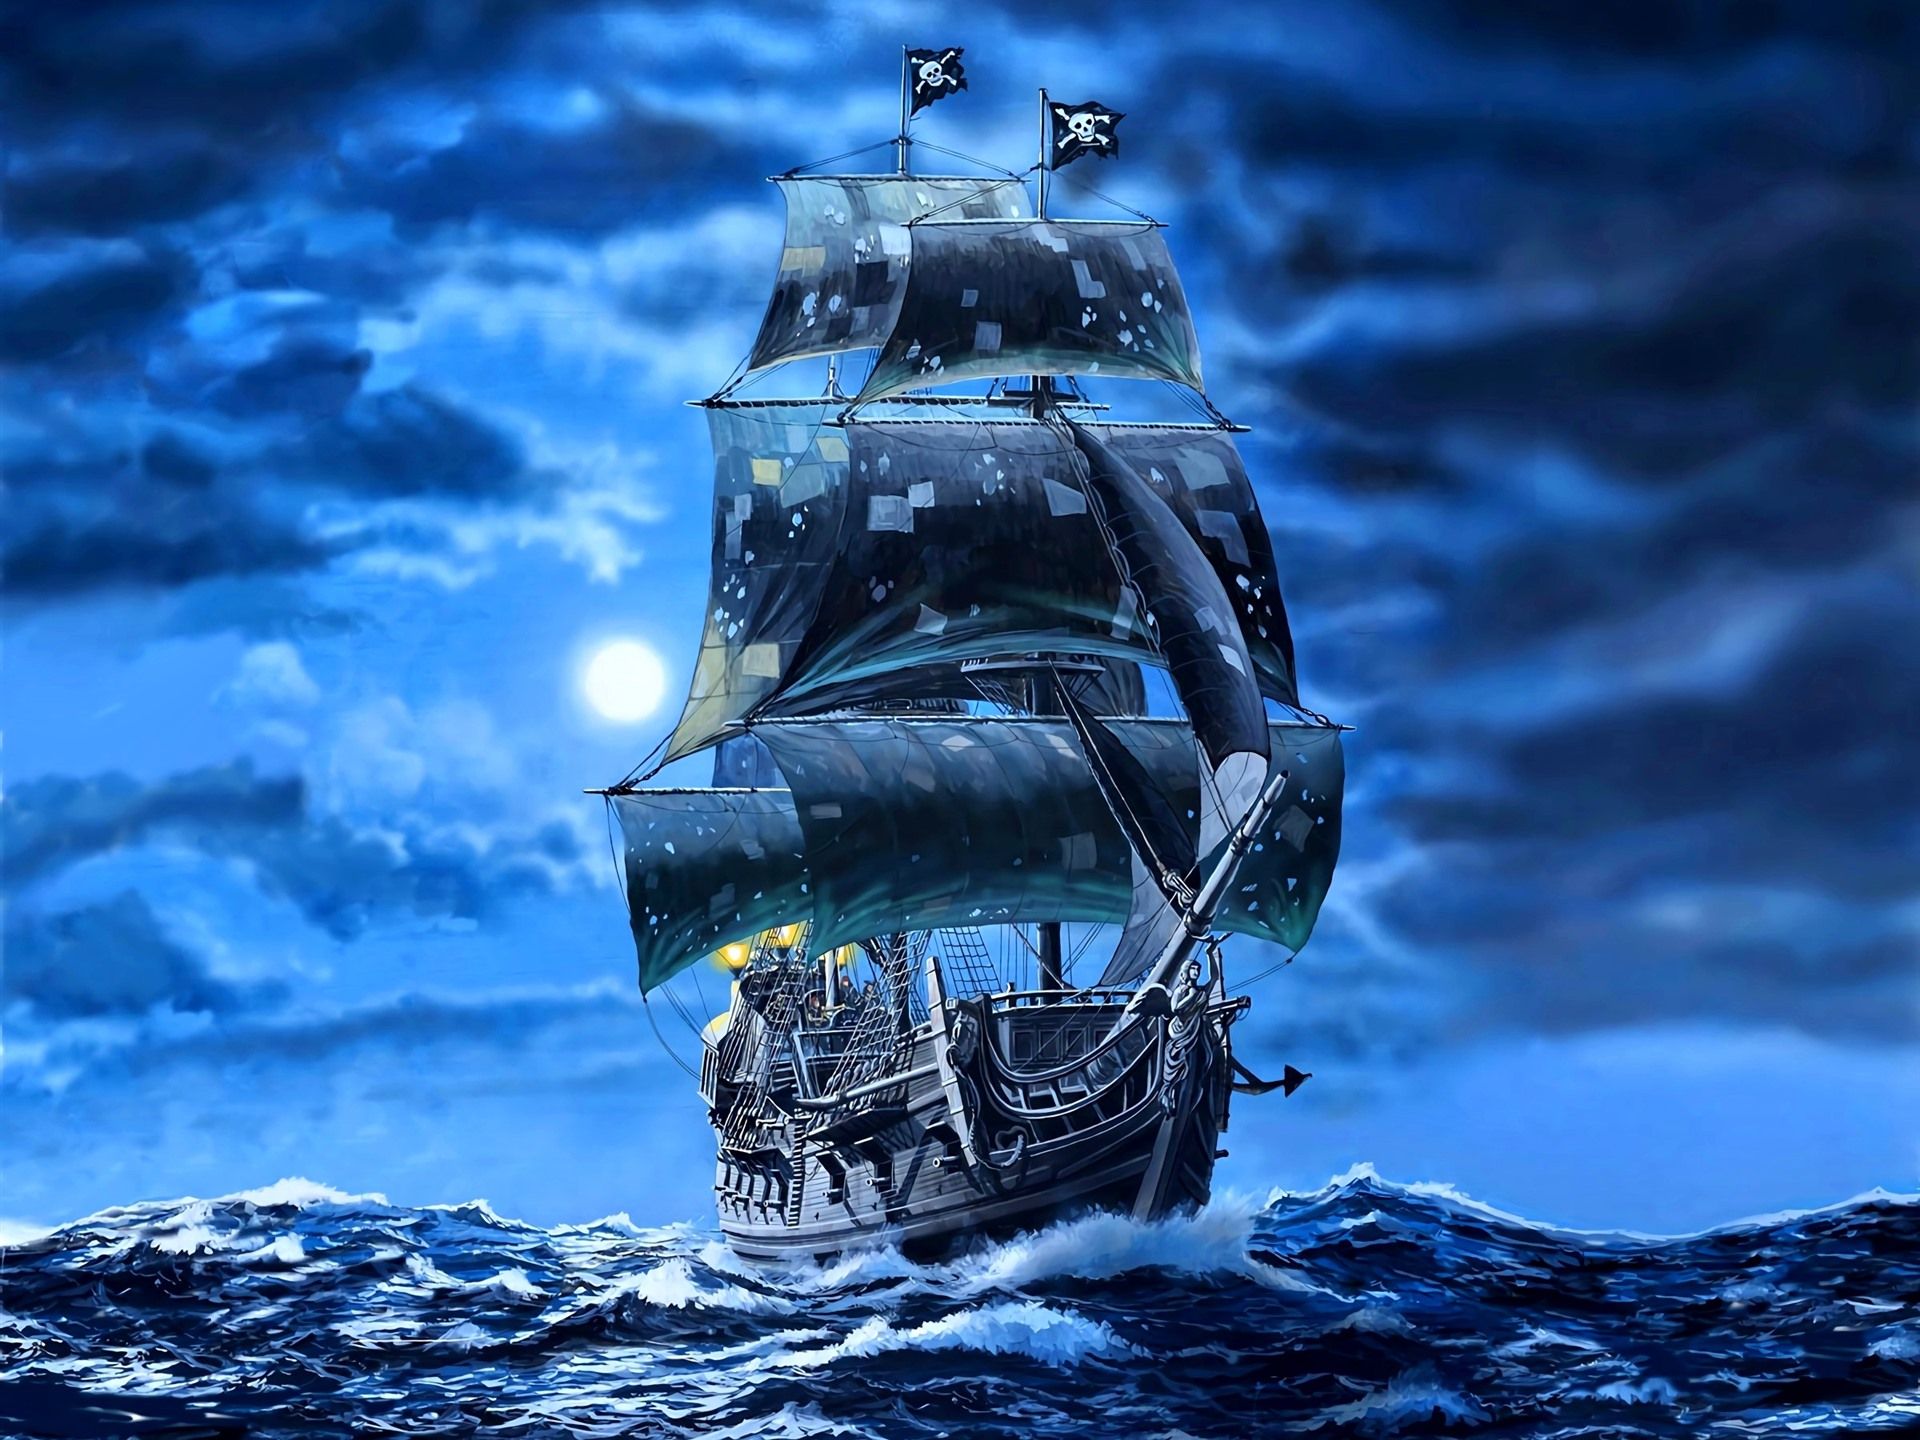 The Black Pearl Wallpapers Wallpaper Cave